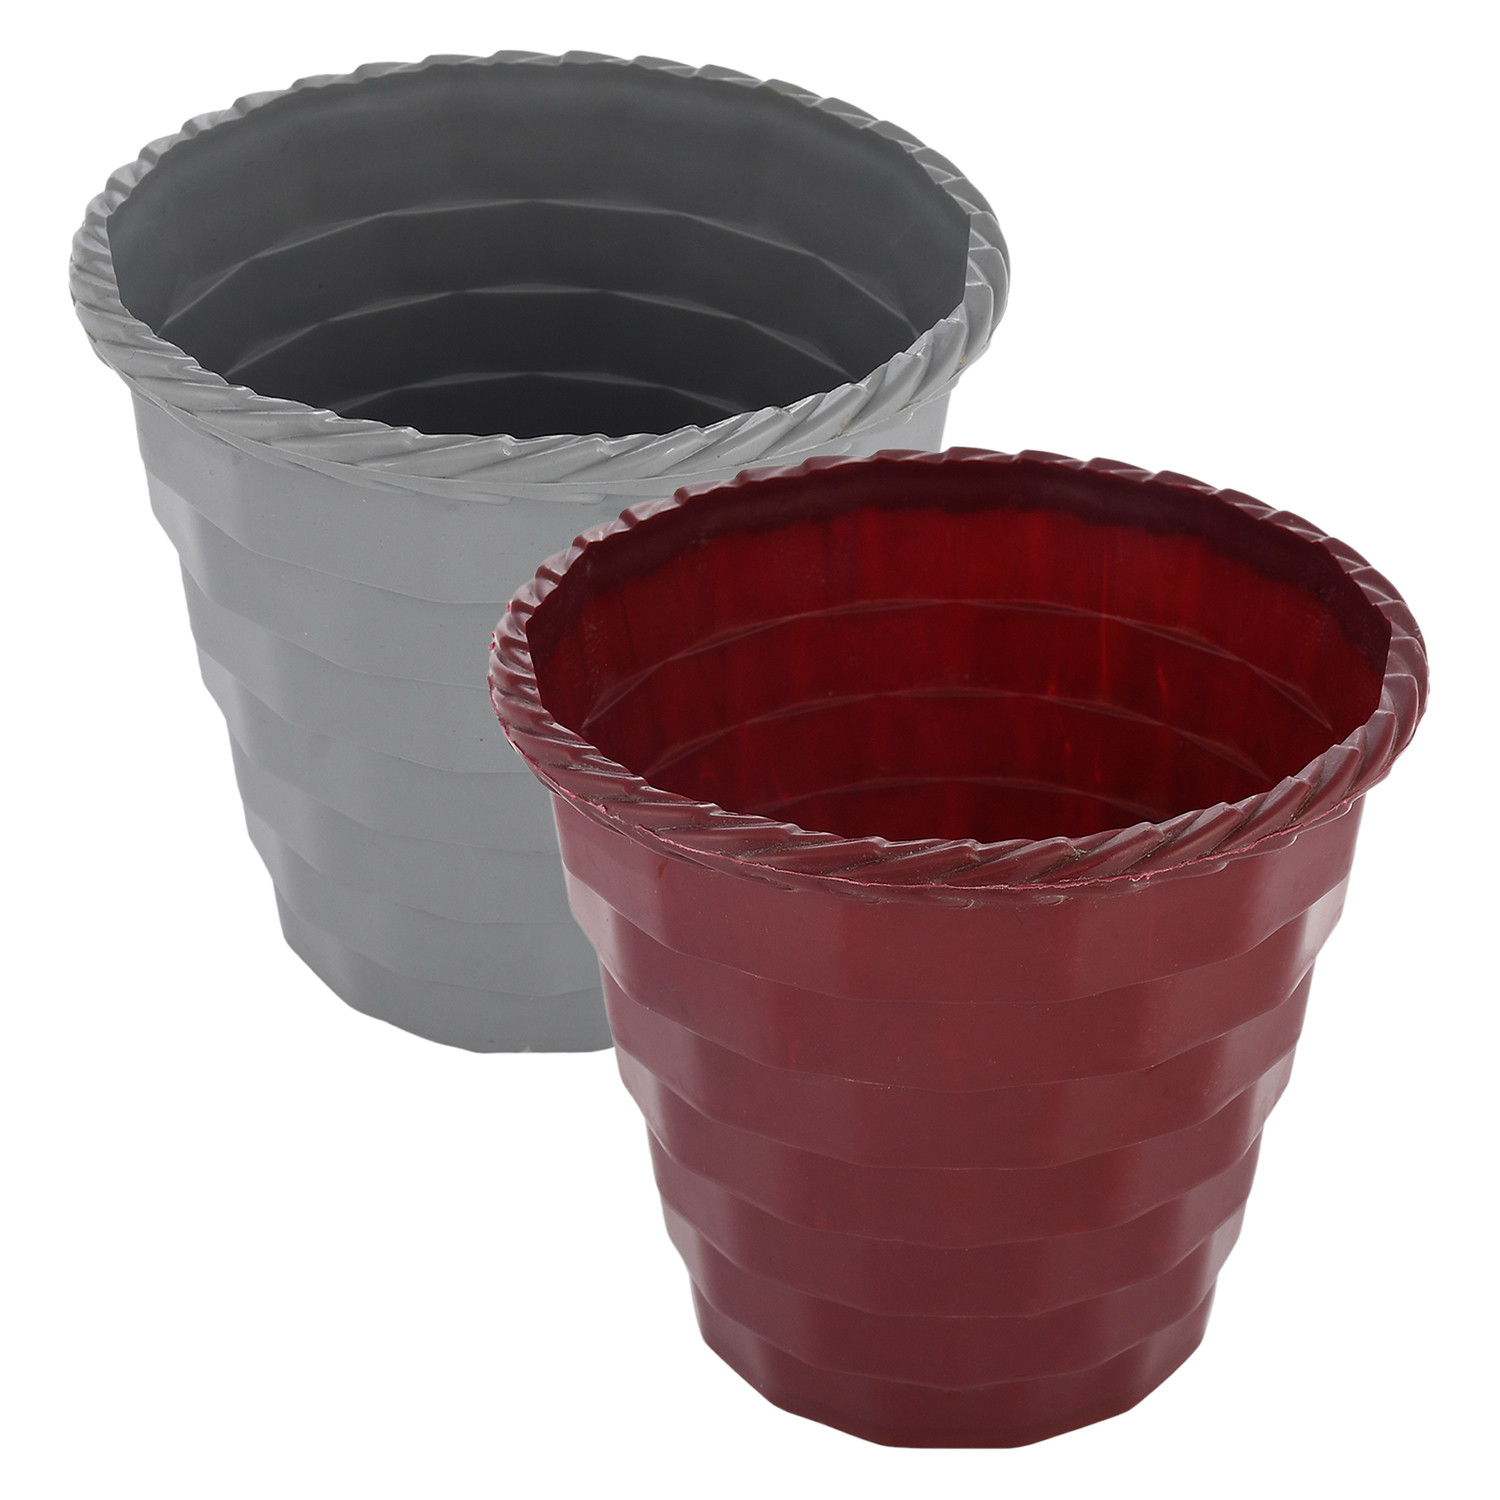 Kuber Industries Brick Flower Pot|Durable Plastic Flower Pots|Planters for Home Décor|Garden|Living Room|Balcony|6 Inch|Pack of 2 (Maroon & Grey)